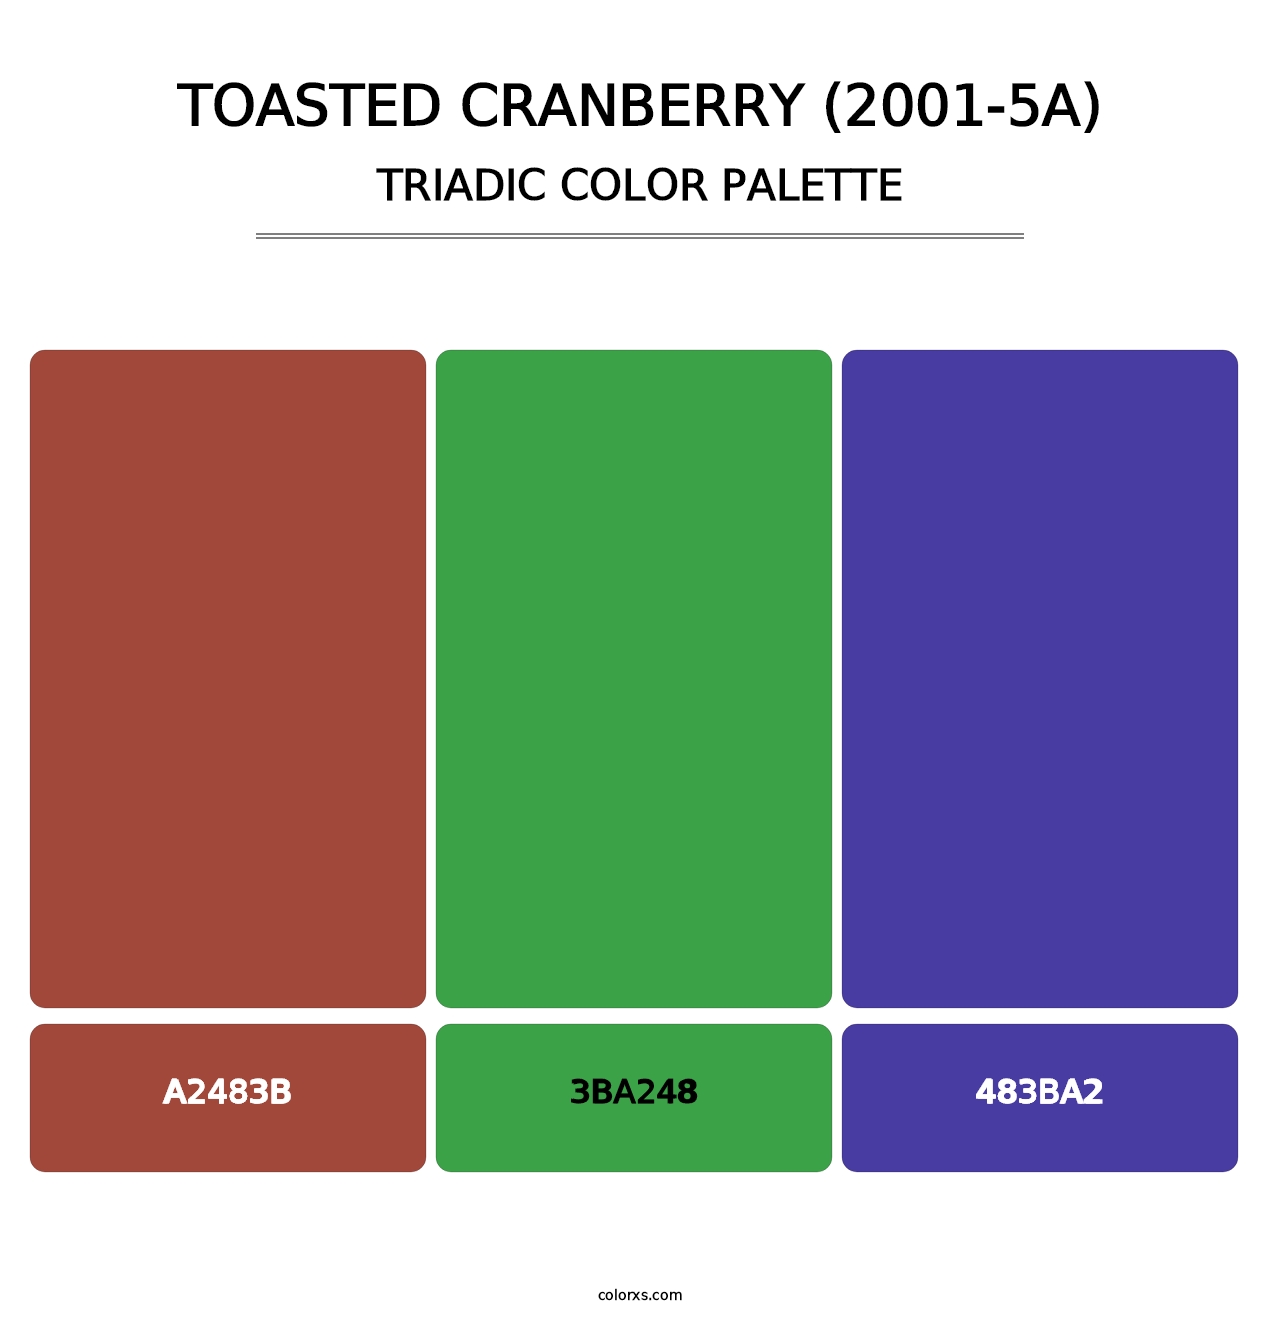 Toasted Cranberry (2001-5A) - Triadic Color Palette